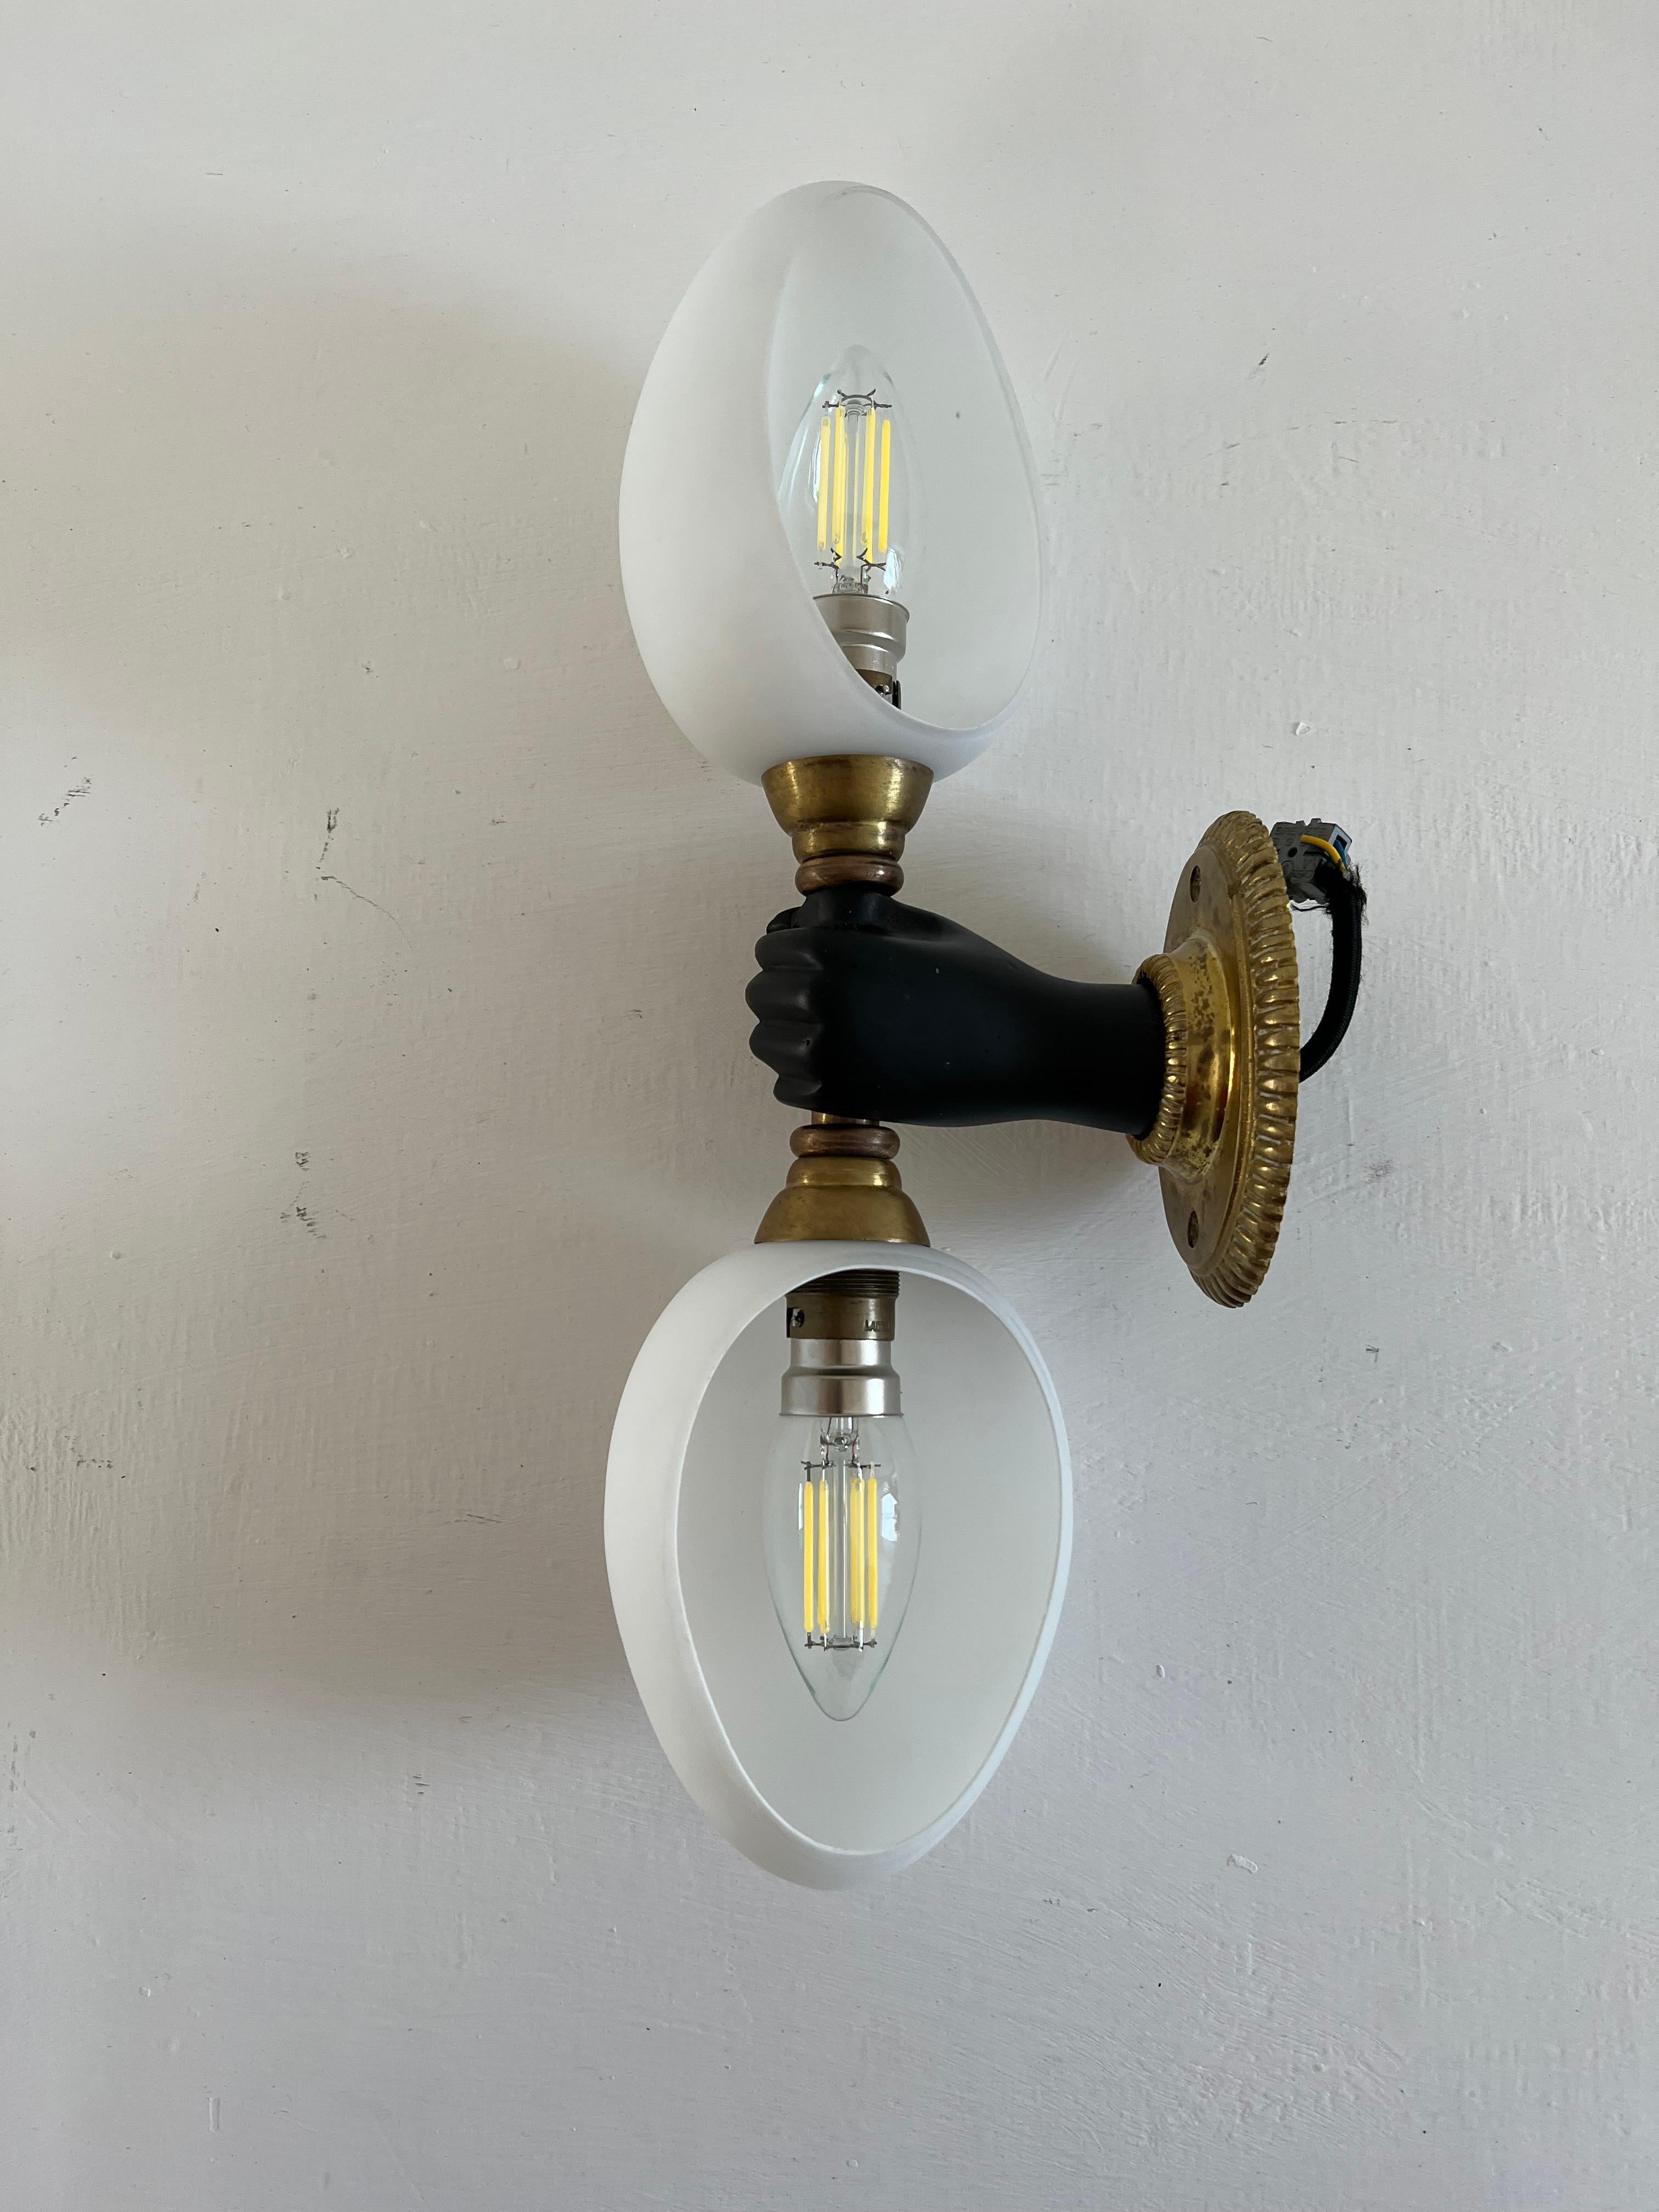 Gorgeous sconce or wall light produced by Maison Arlus in bronze and opaline glass.
Made in France, circa 1950s. 
The light consists of a hand holding 2 positionable half egg opaline shades and takes 2 bayonette bulbs.
There is 1 sconce available.